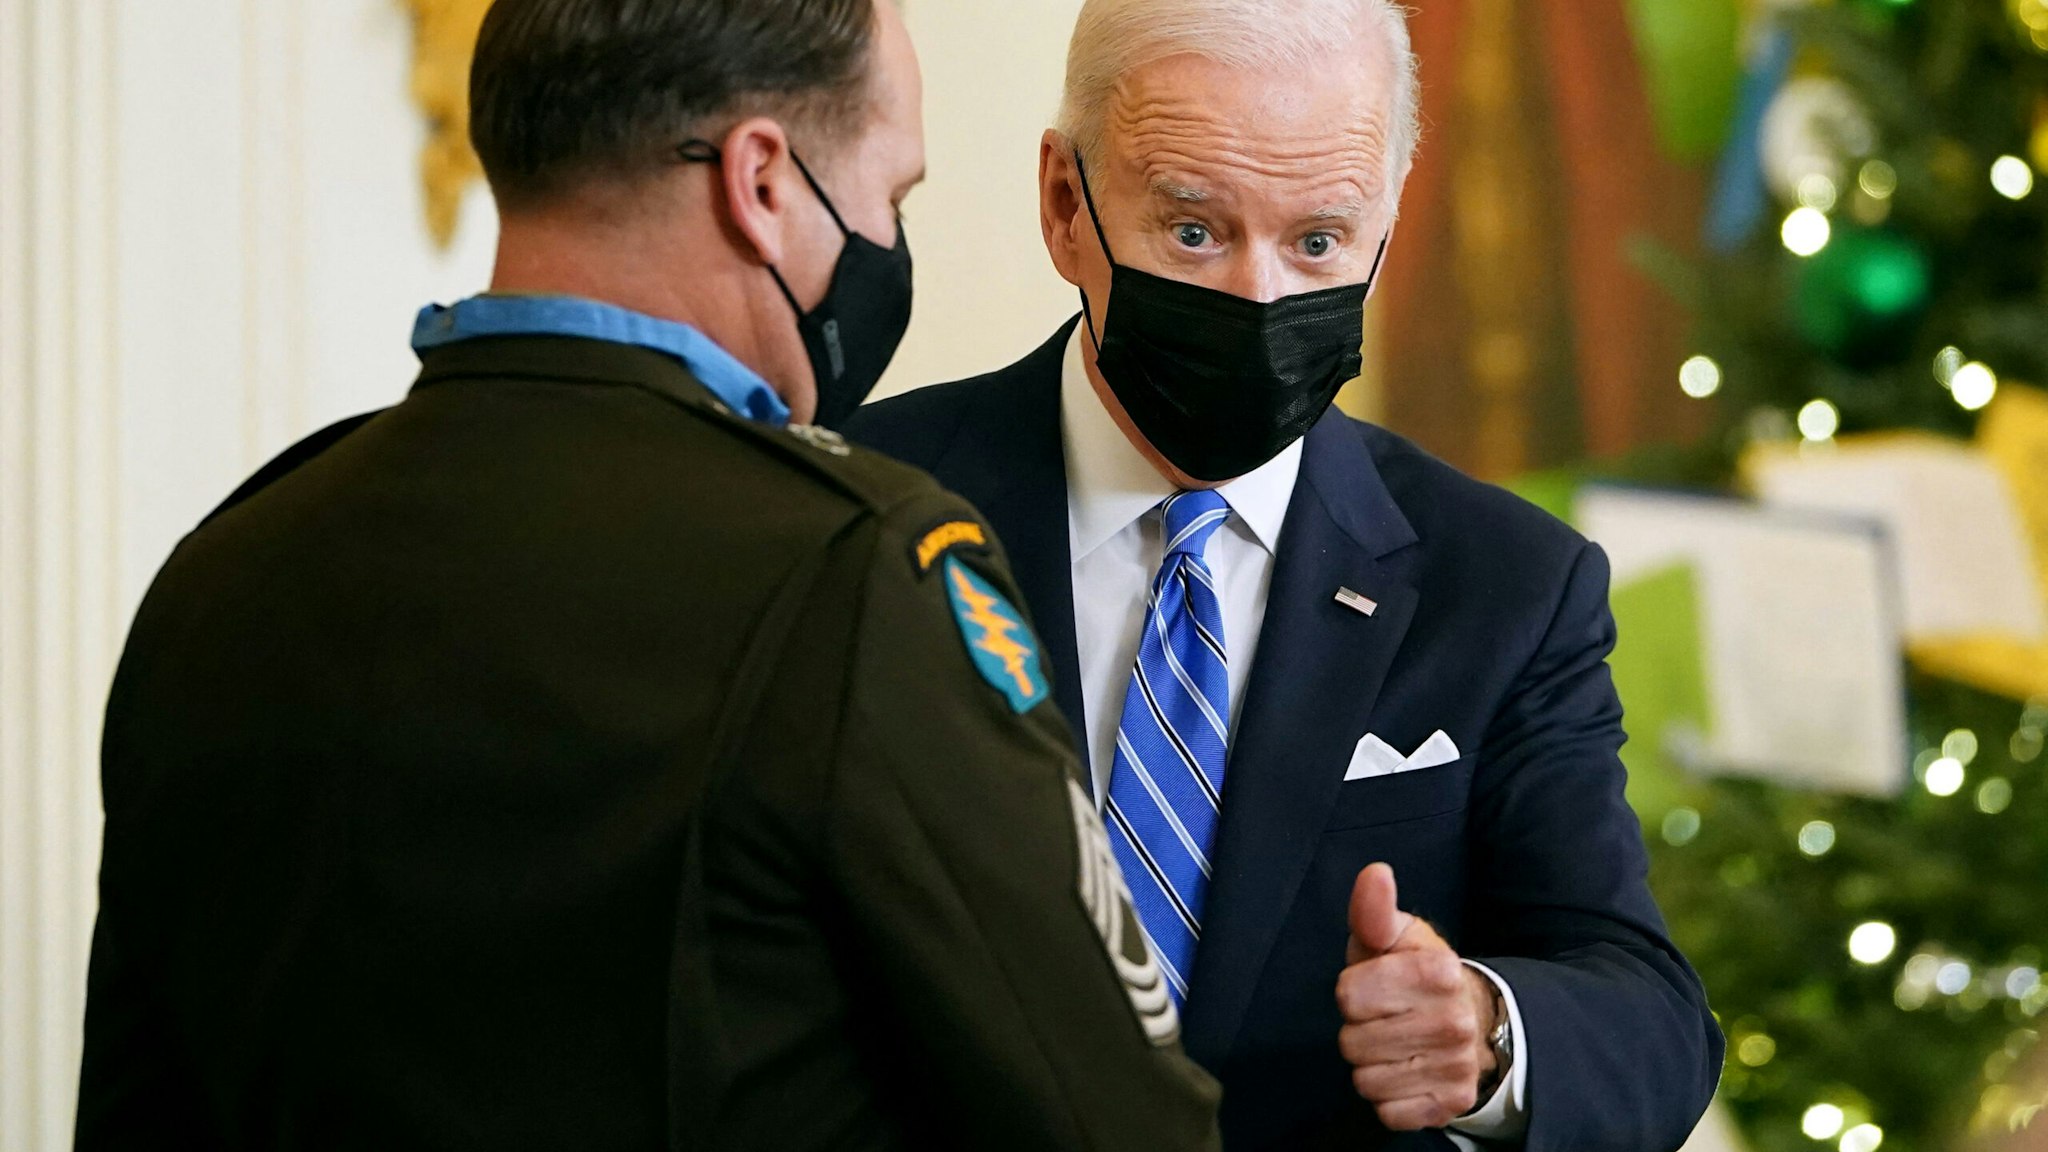 US President Joe Biden gives a thumbs up after presenting the Medal of Honor to US Army Master Sergeant Earl D. Plumlee during a ceremony in the East Room of the White House in Washington, DC on December 16, 2021.